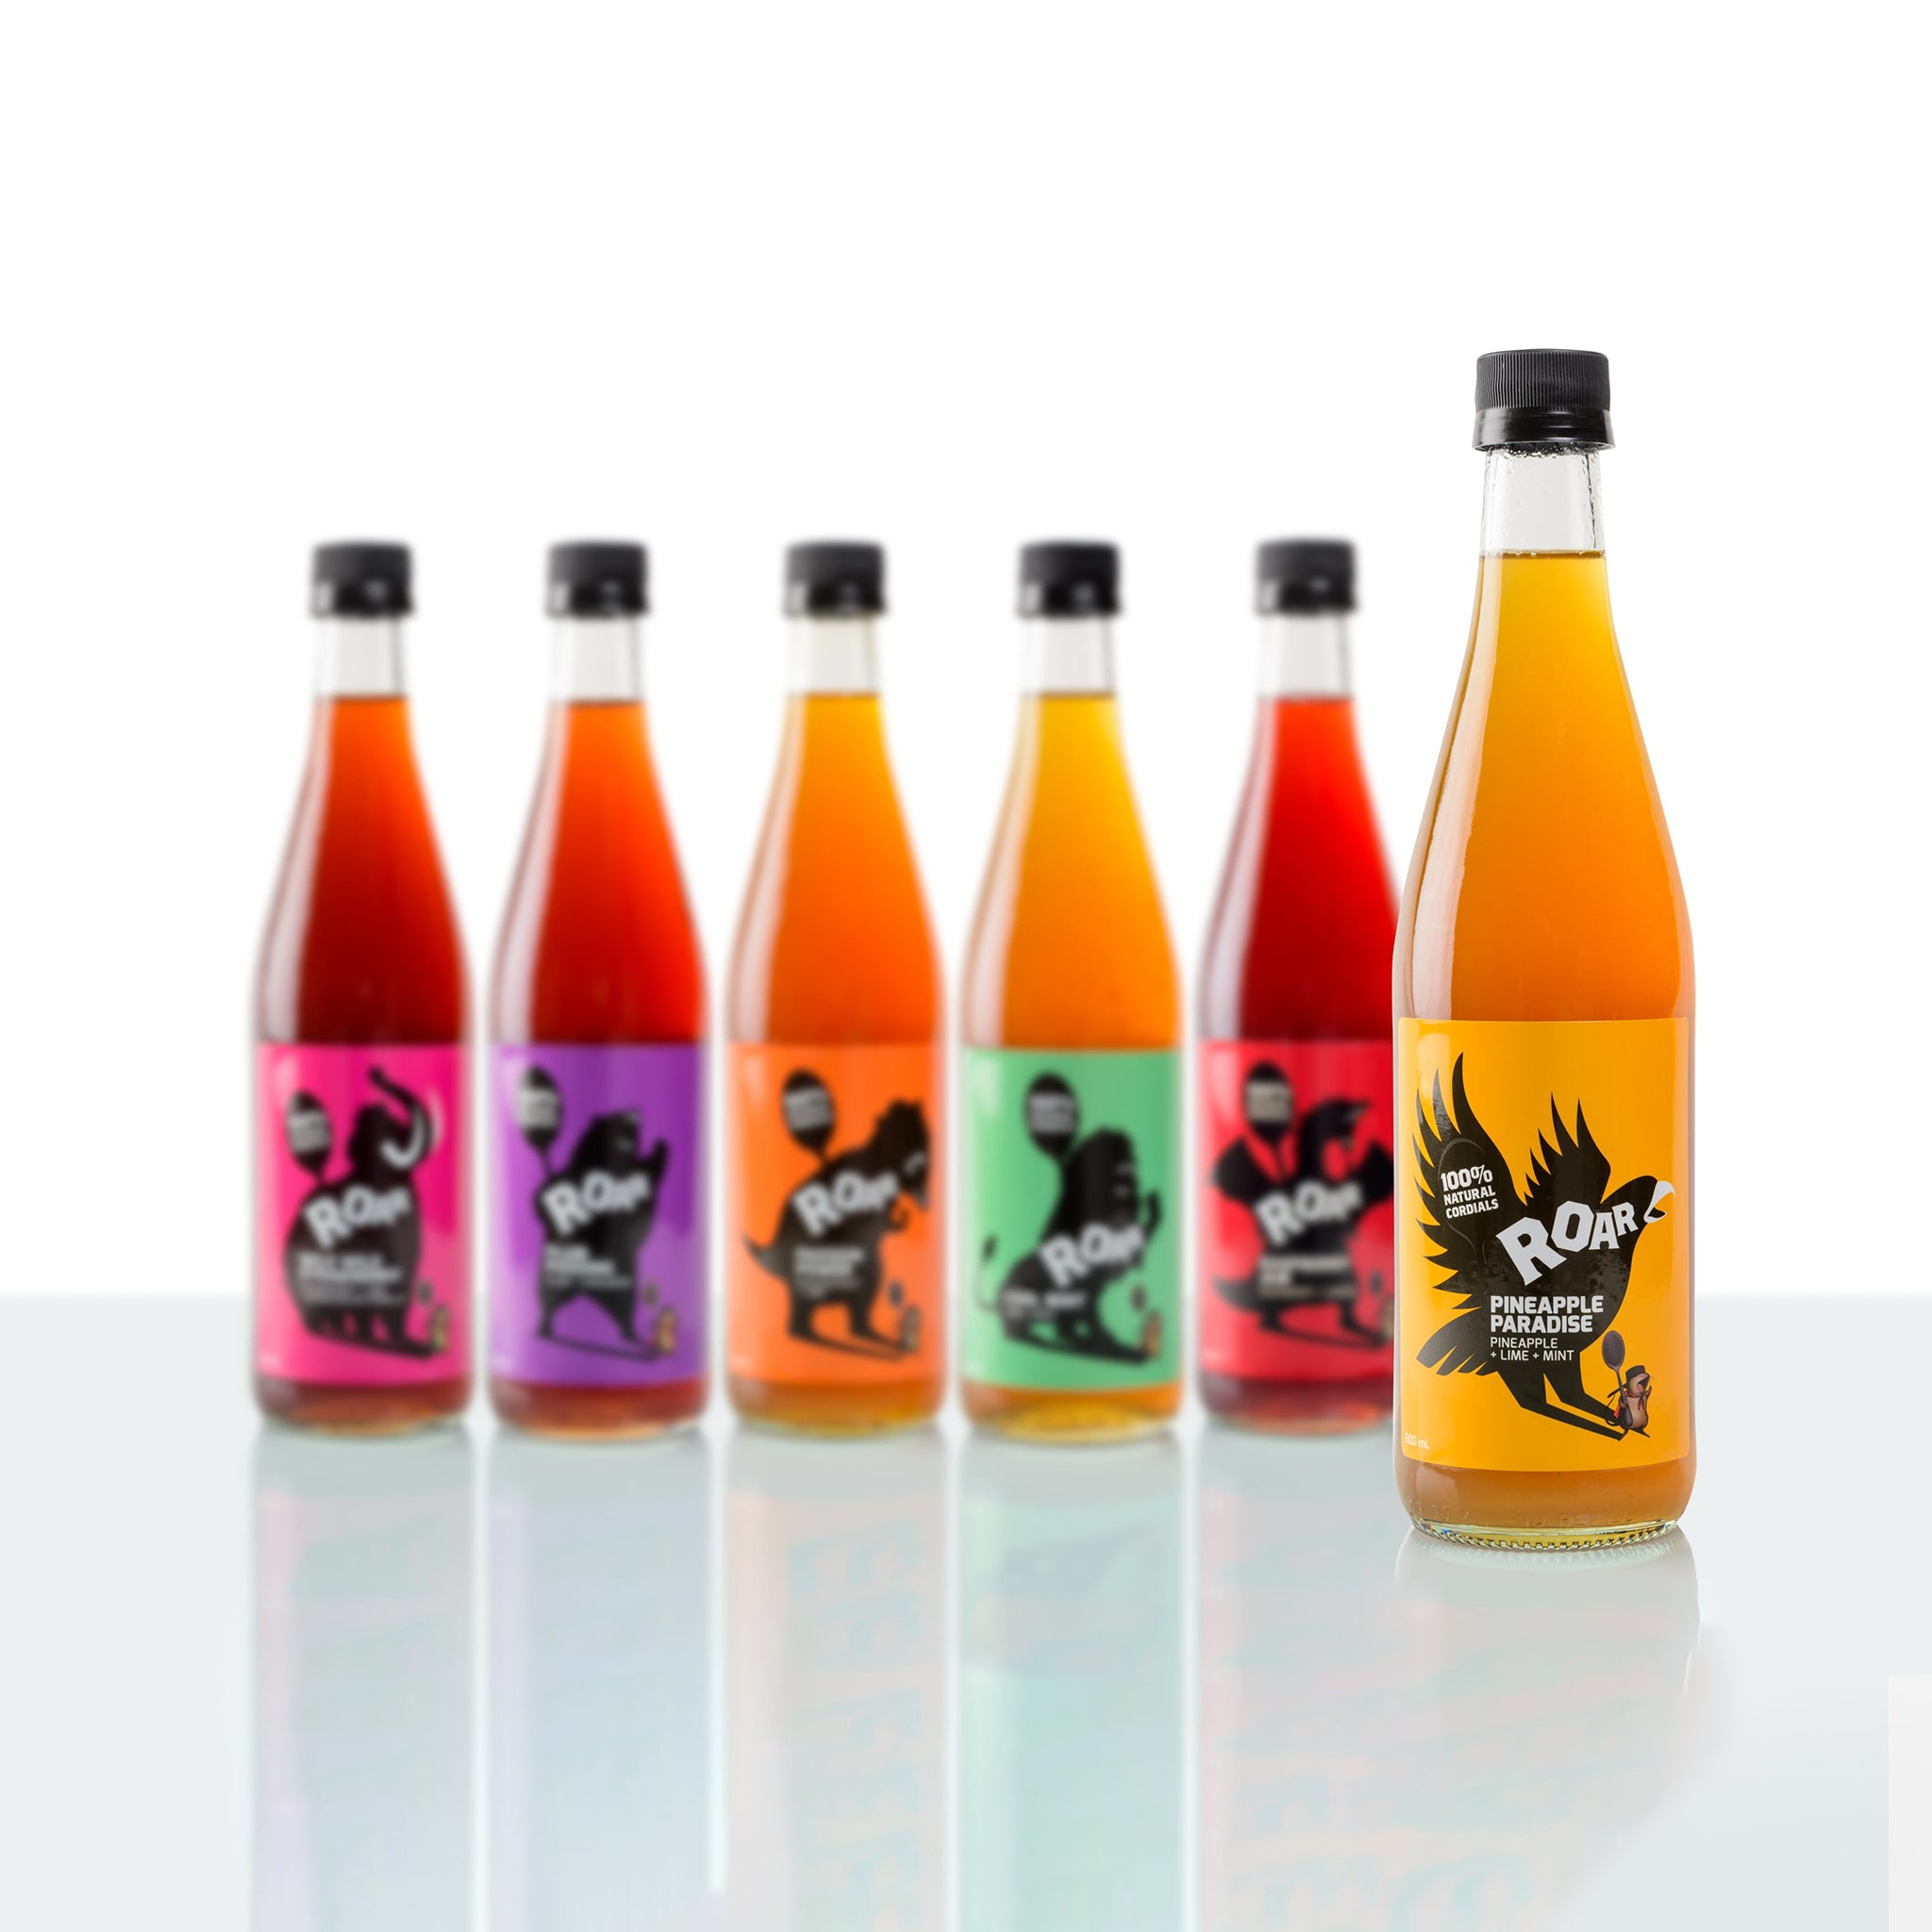 All natural pineapple cordial highlighted in group photo of Roar Living entire 100% natural cordial range.